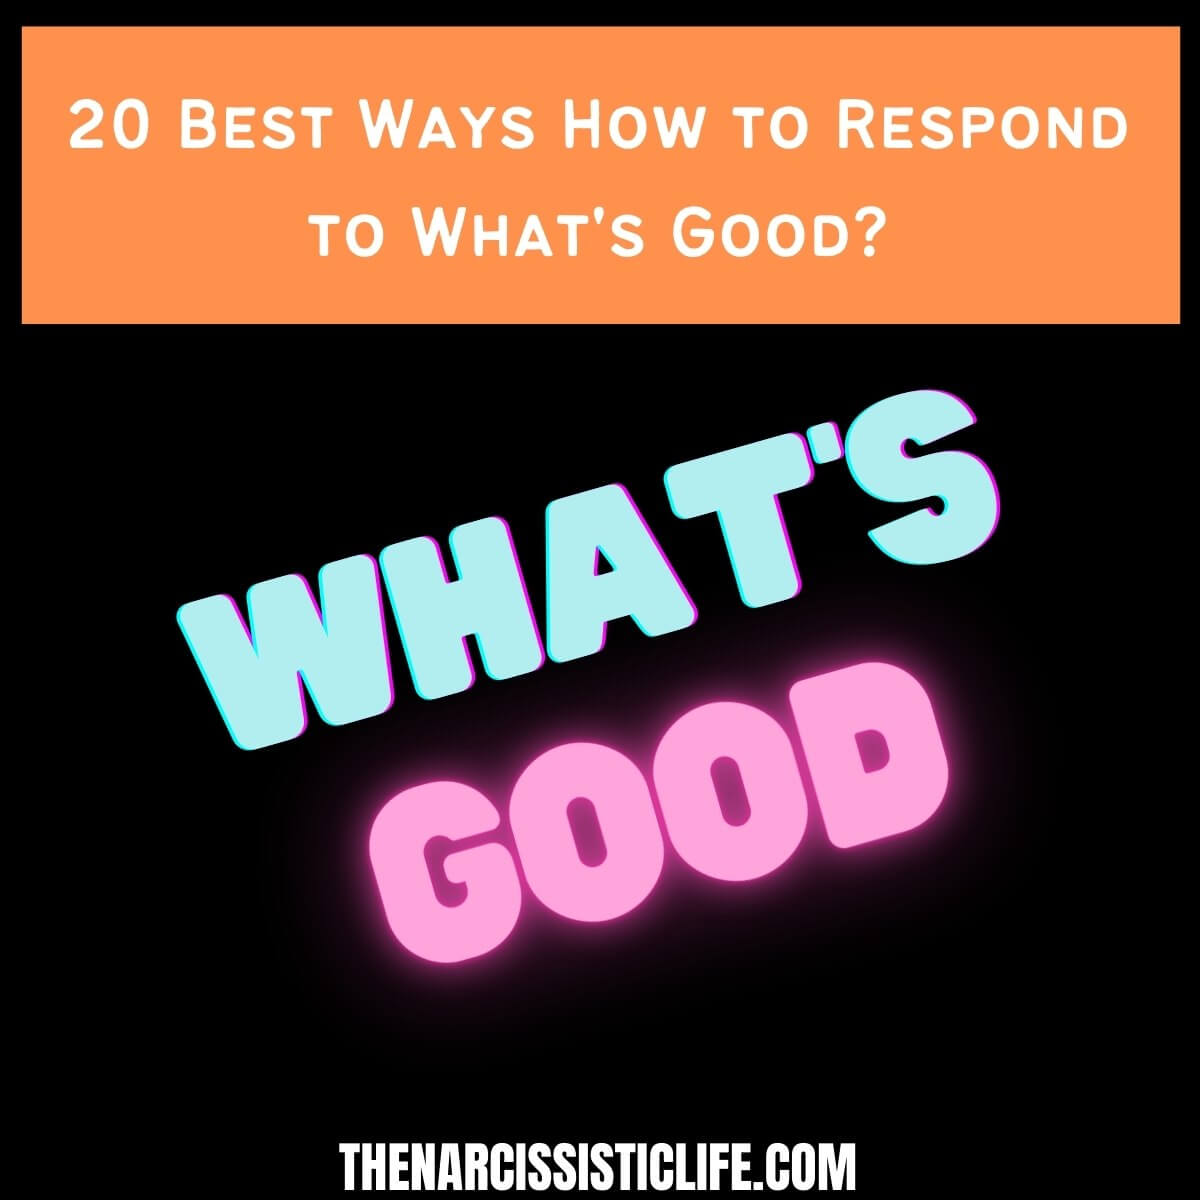 20 Best Ways How to Respond to What's Good